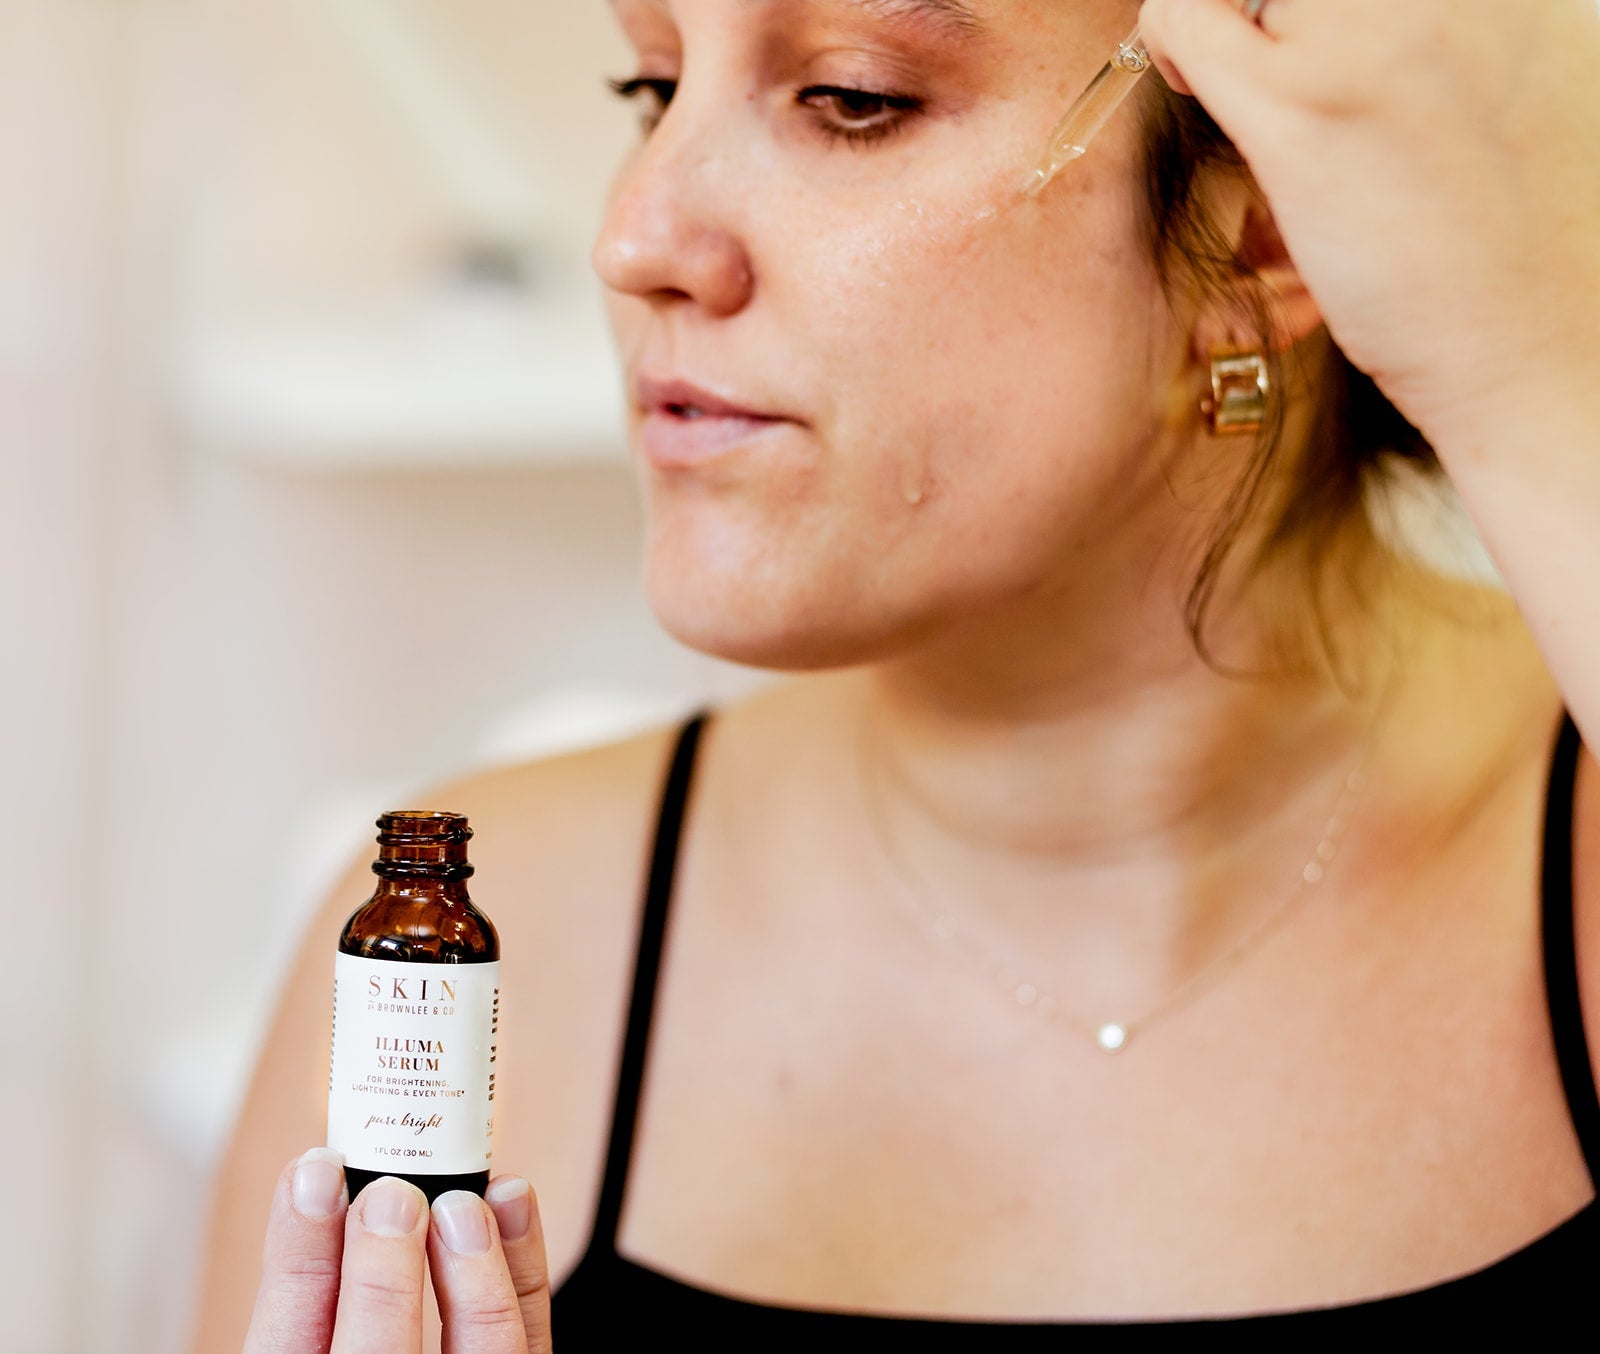 Pregnancy x Skincare: How to stay clear when you’re expecting - Skin by Brownlee & Co.